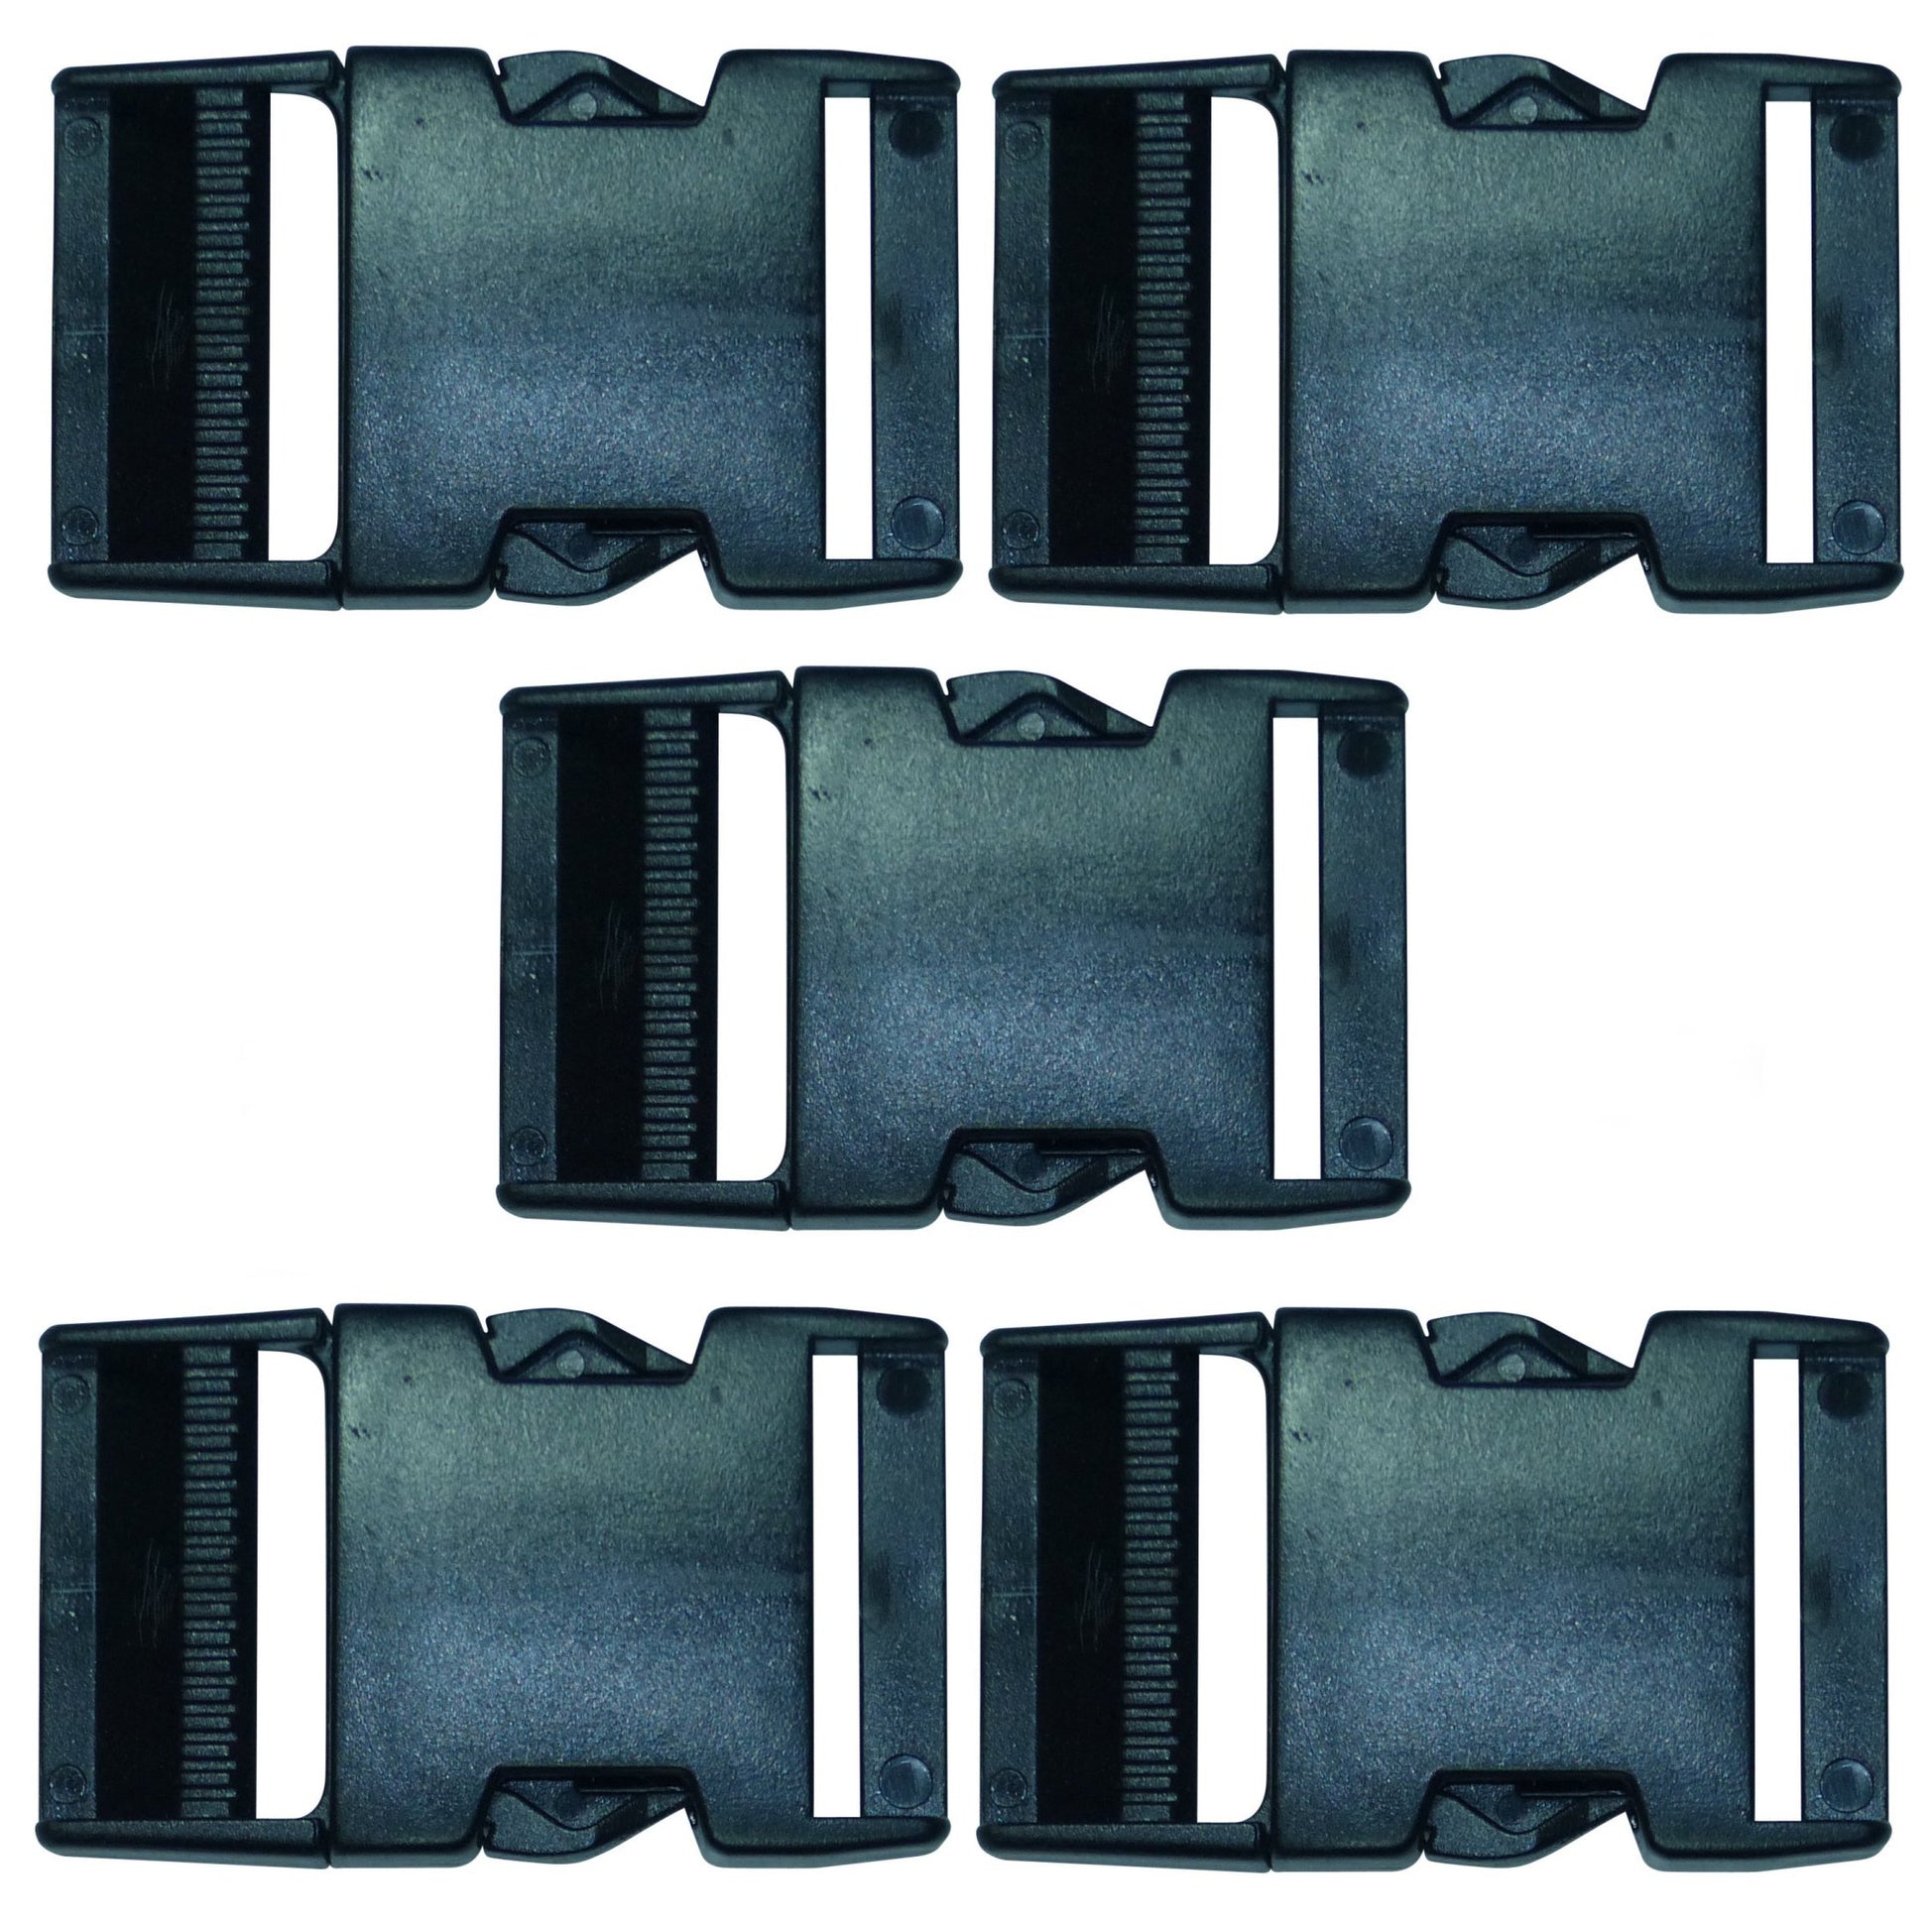 Benristraps 38mm plastic quick release buckle (pack of 5)